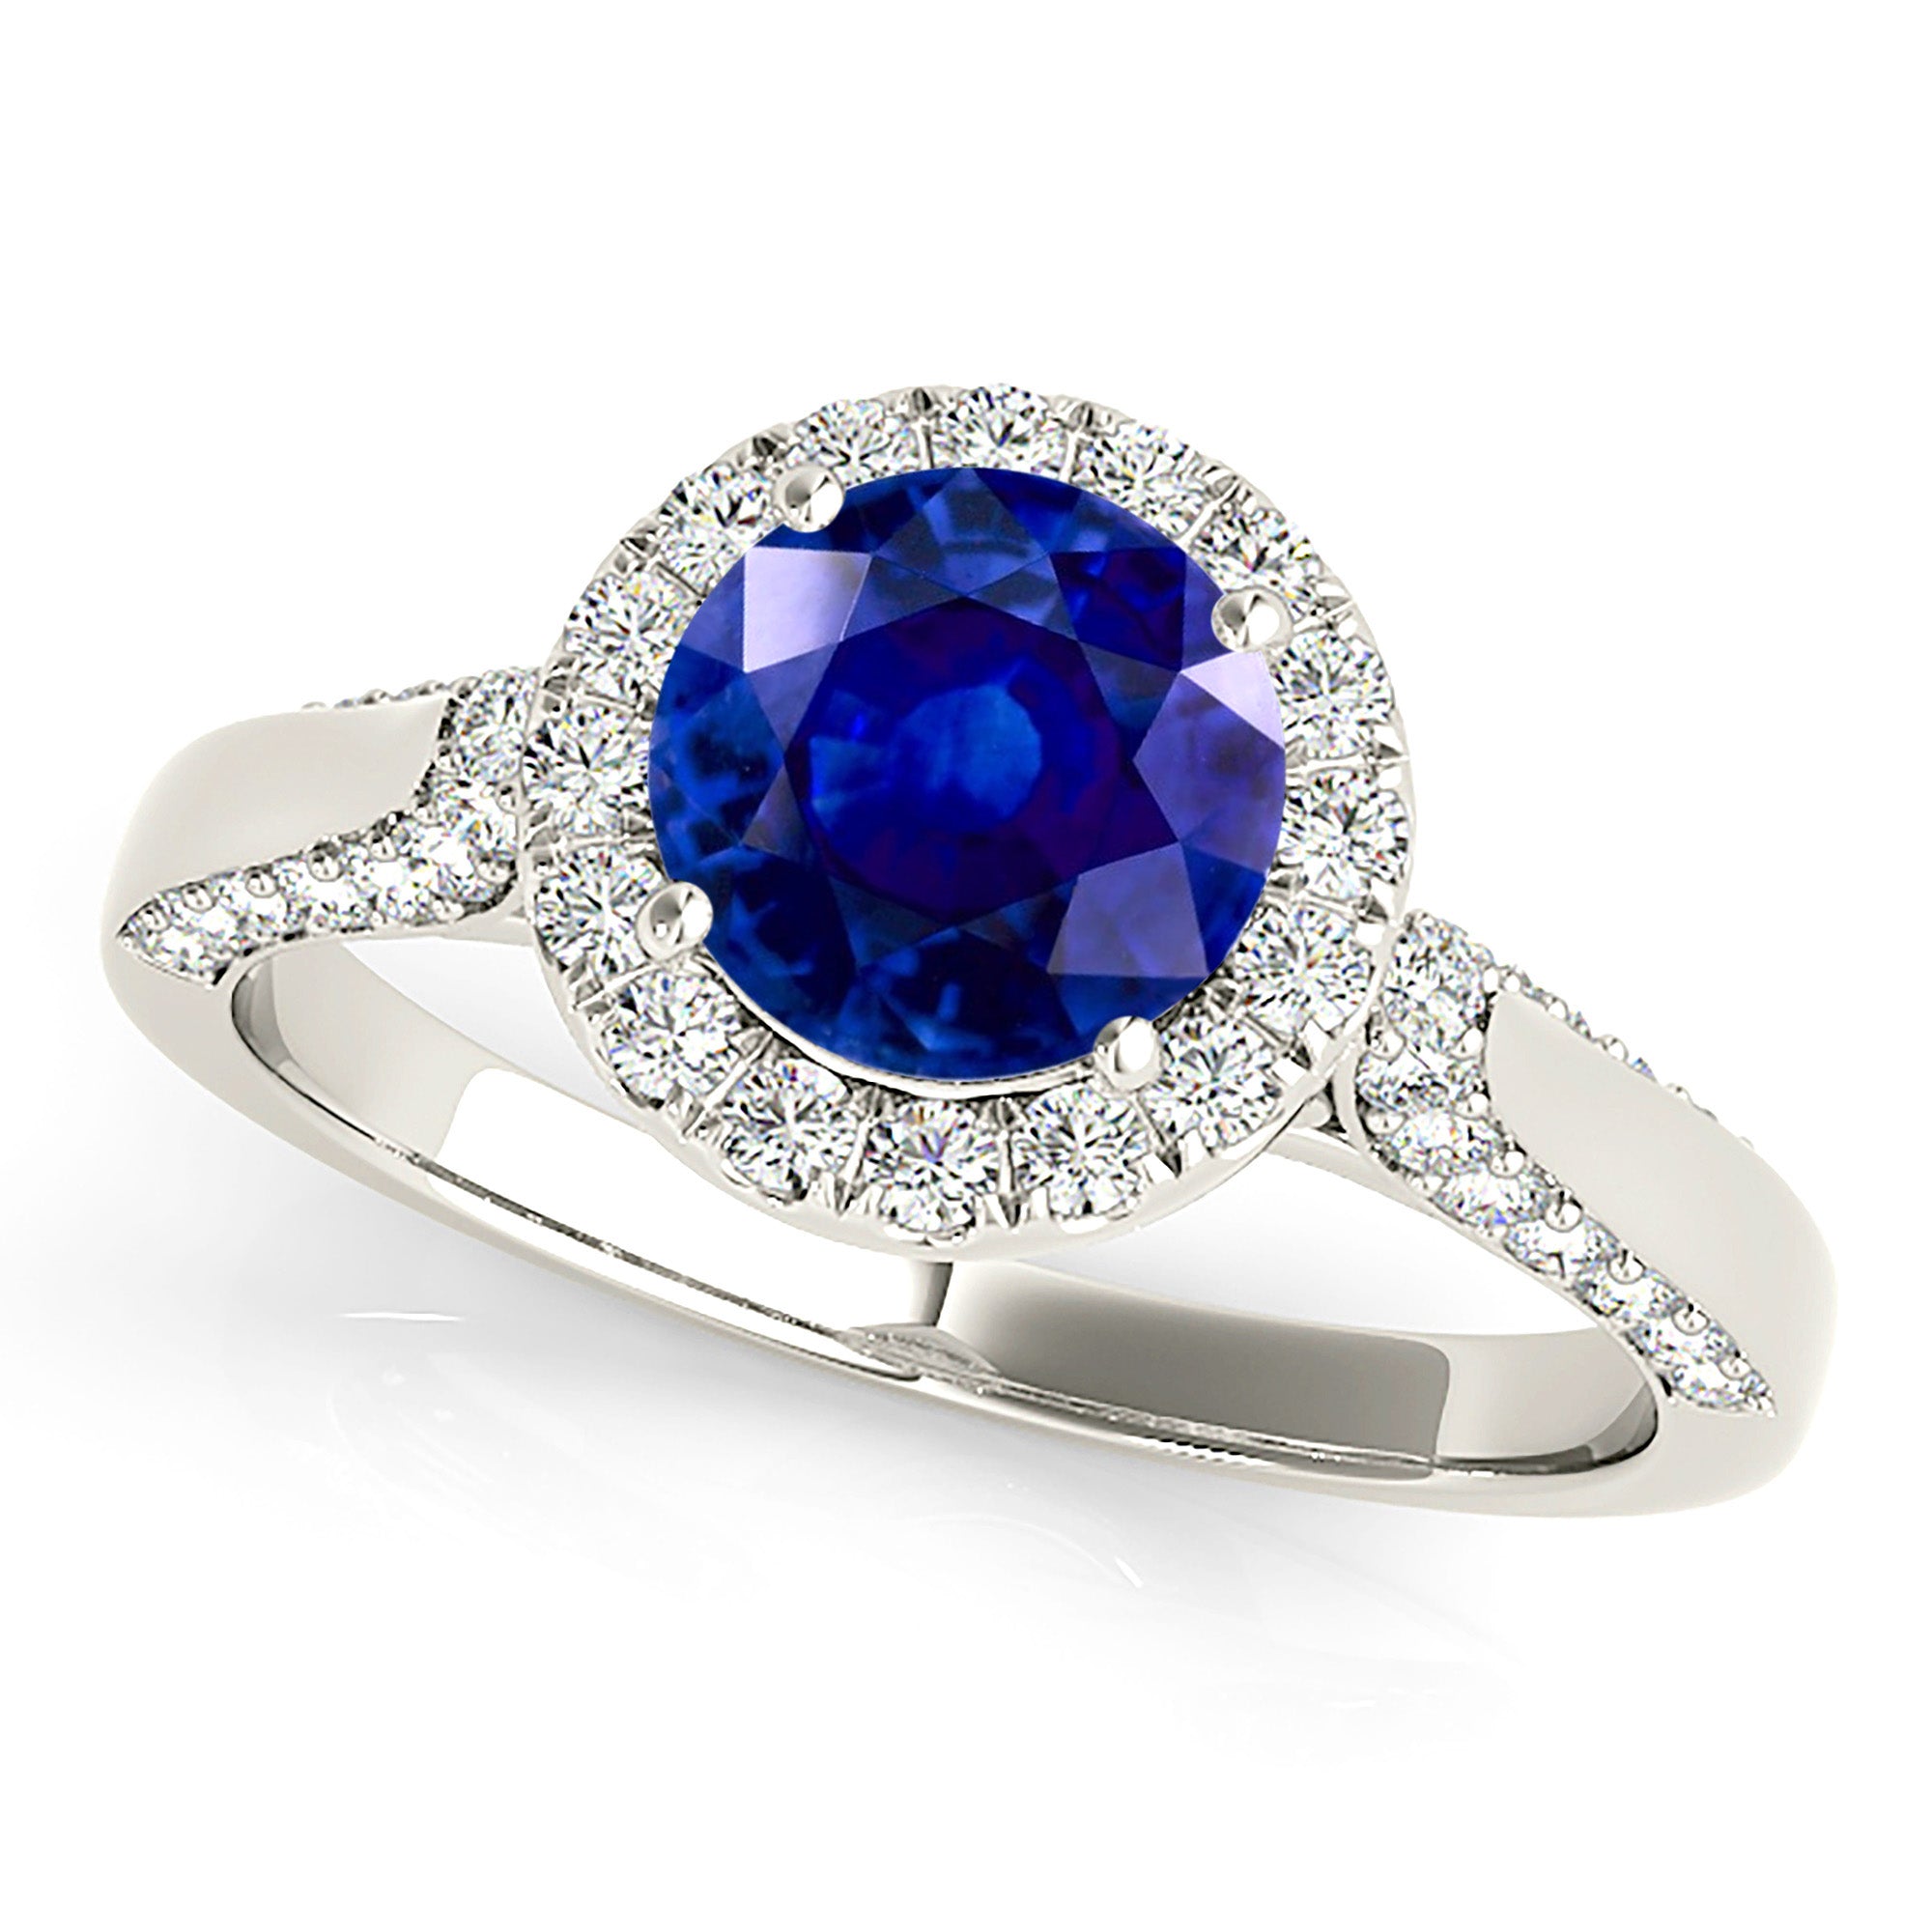 1.80 ct. Genuine Blue Sapphire Halo Engagement Ring With 0.55 ctw. Side And Accent Diamonds-in 14K/18K White, Yellow, Rose Gold and Platinum - Christmas Jewelry Gift -VIRABYANI